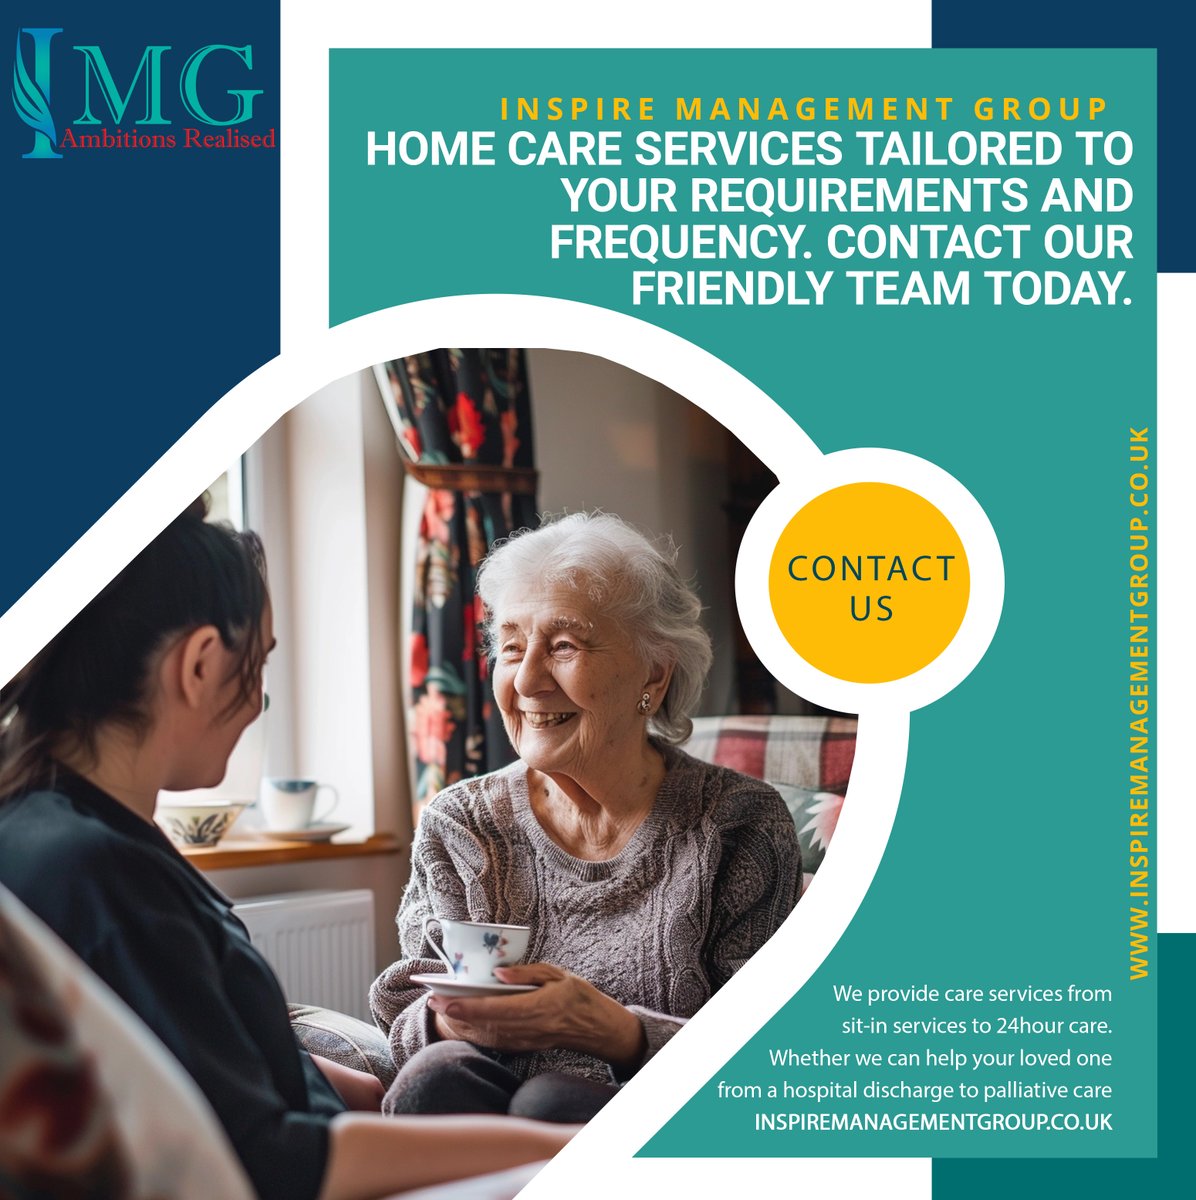 We tailor our home care services to suit you and your individual home care requriements. Contact us today inspiremanagementgroup.co.uk #care #carer #homecare #kingstonuponthames #careservices